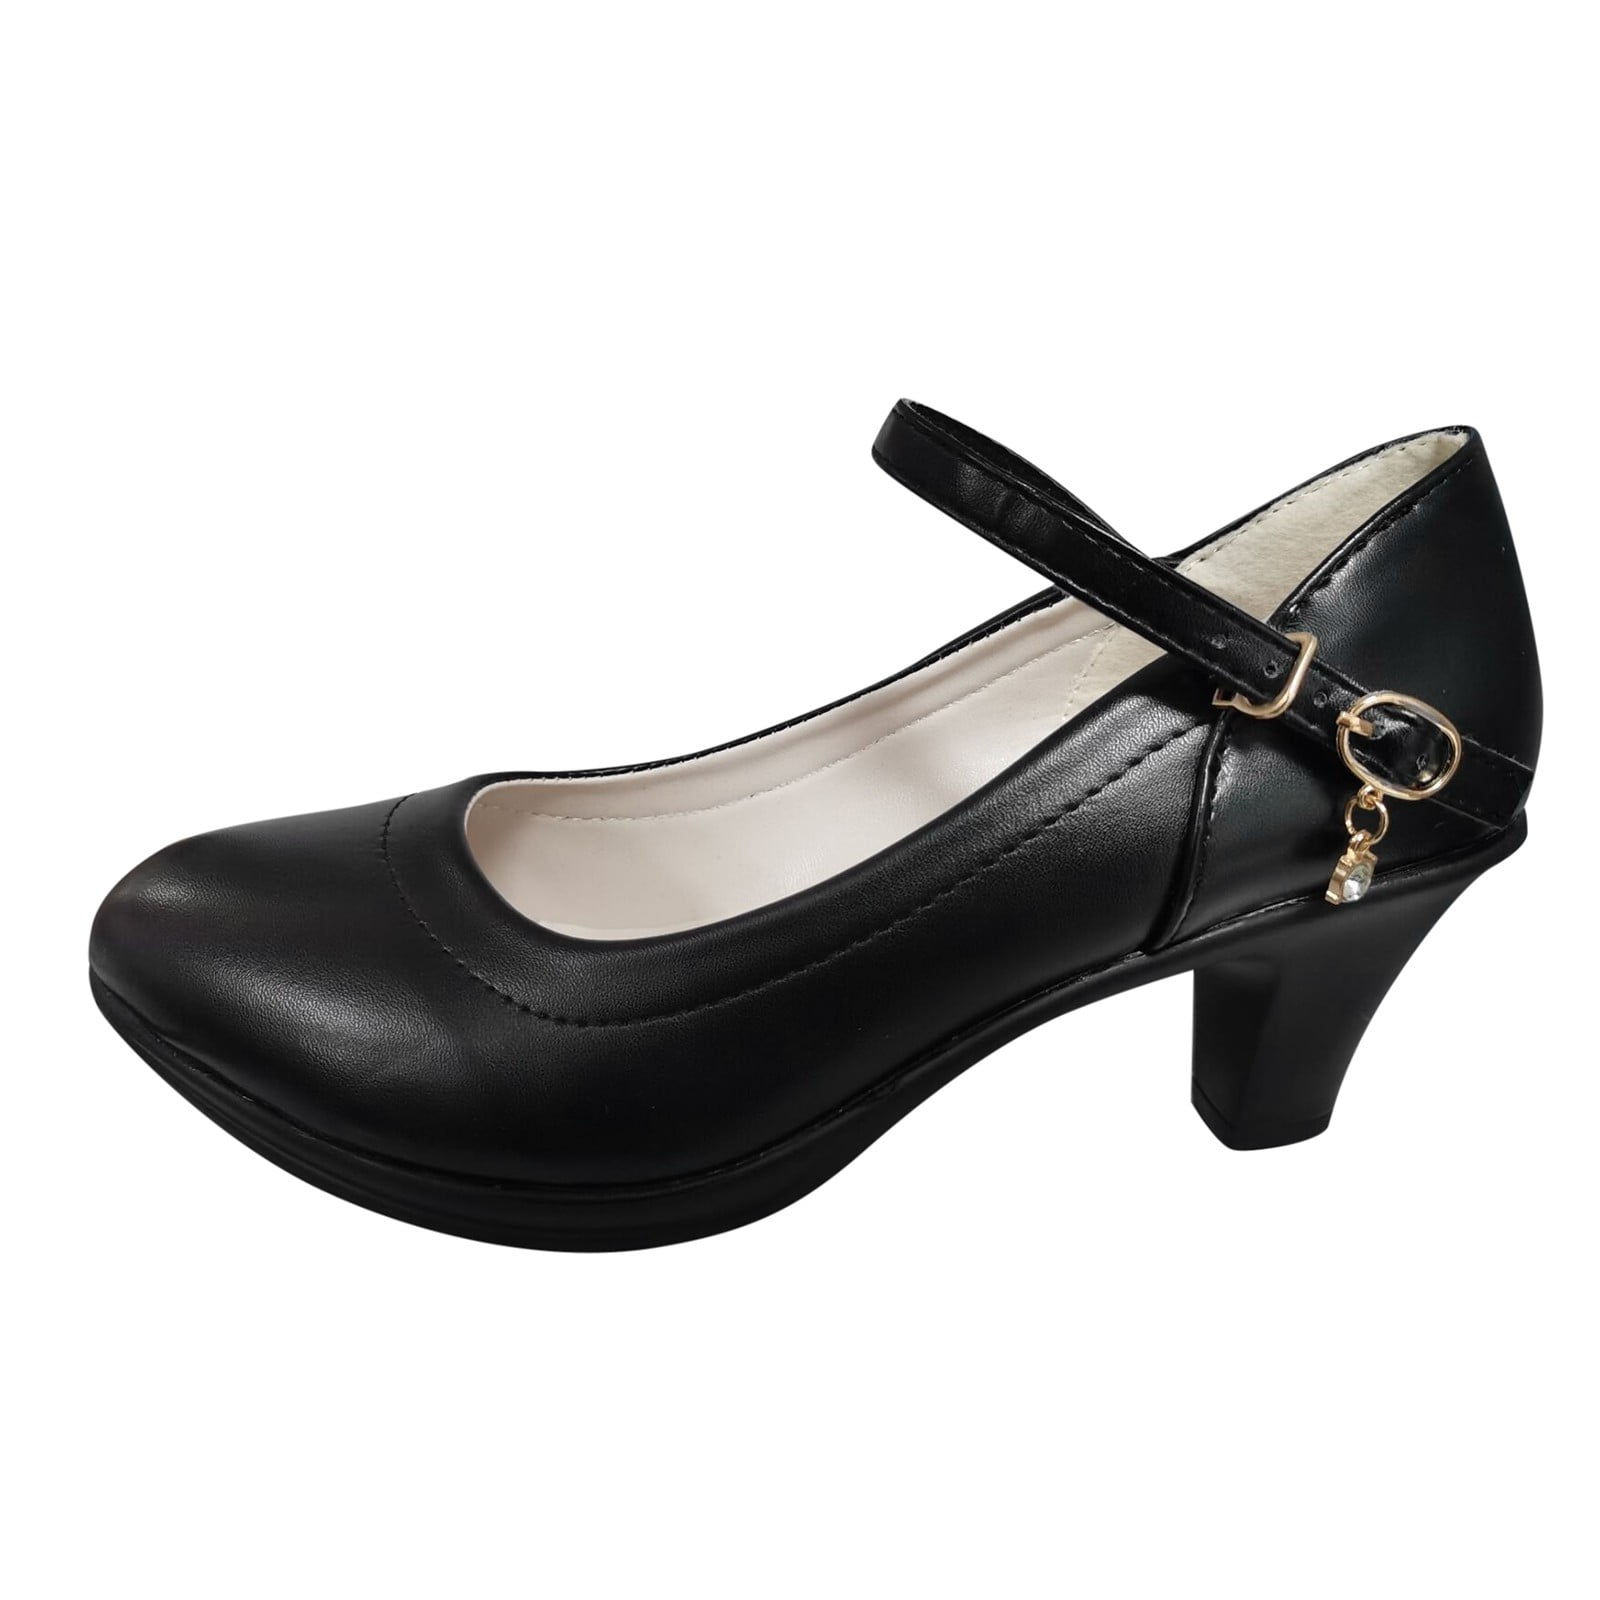 Black Hallie Patent Leather Mary Janes - CHARLES & KEITH IN